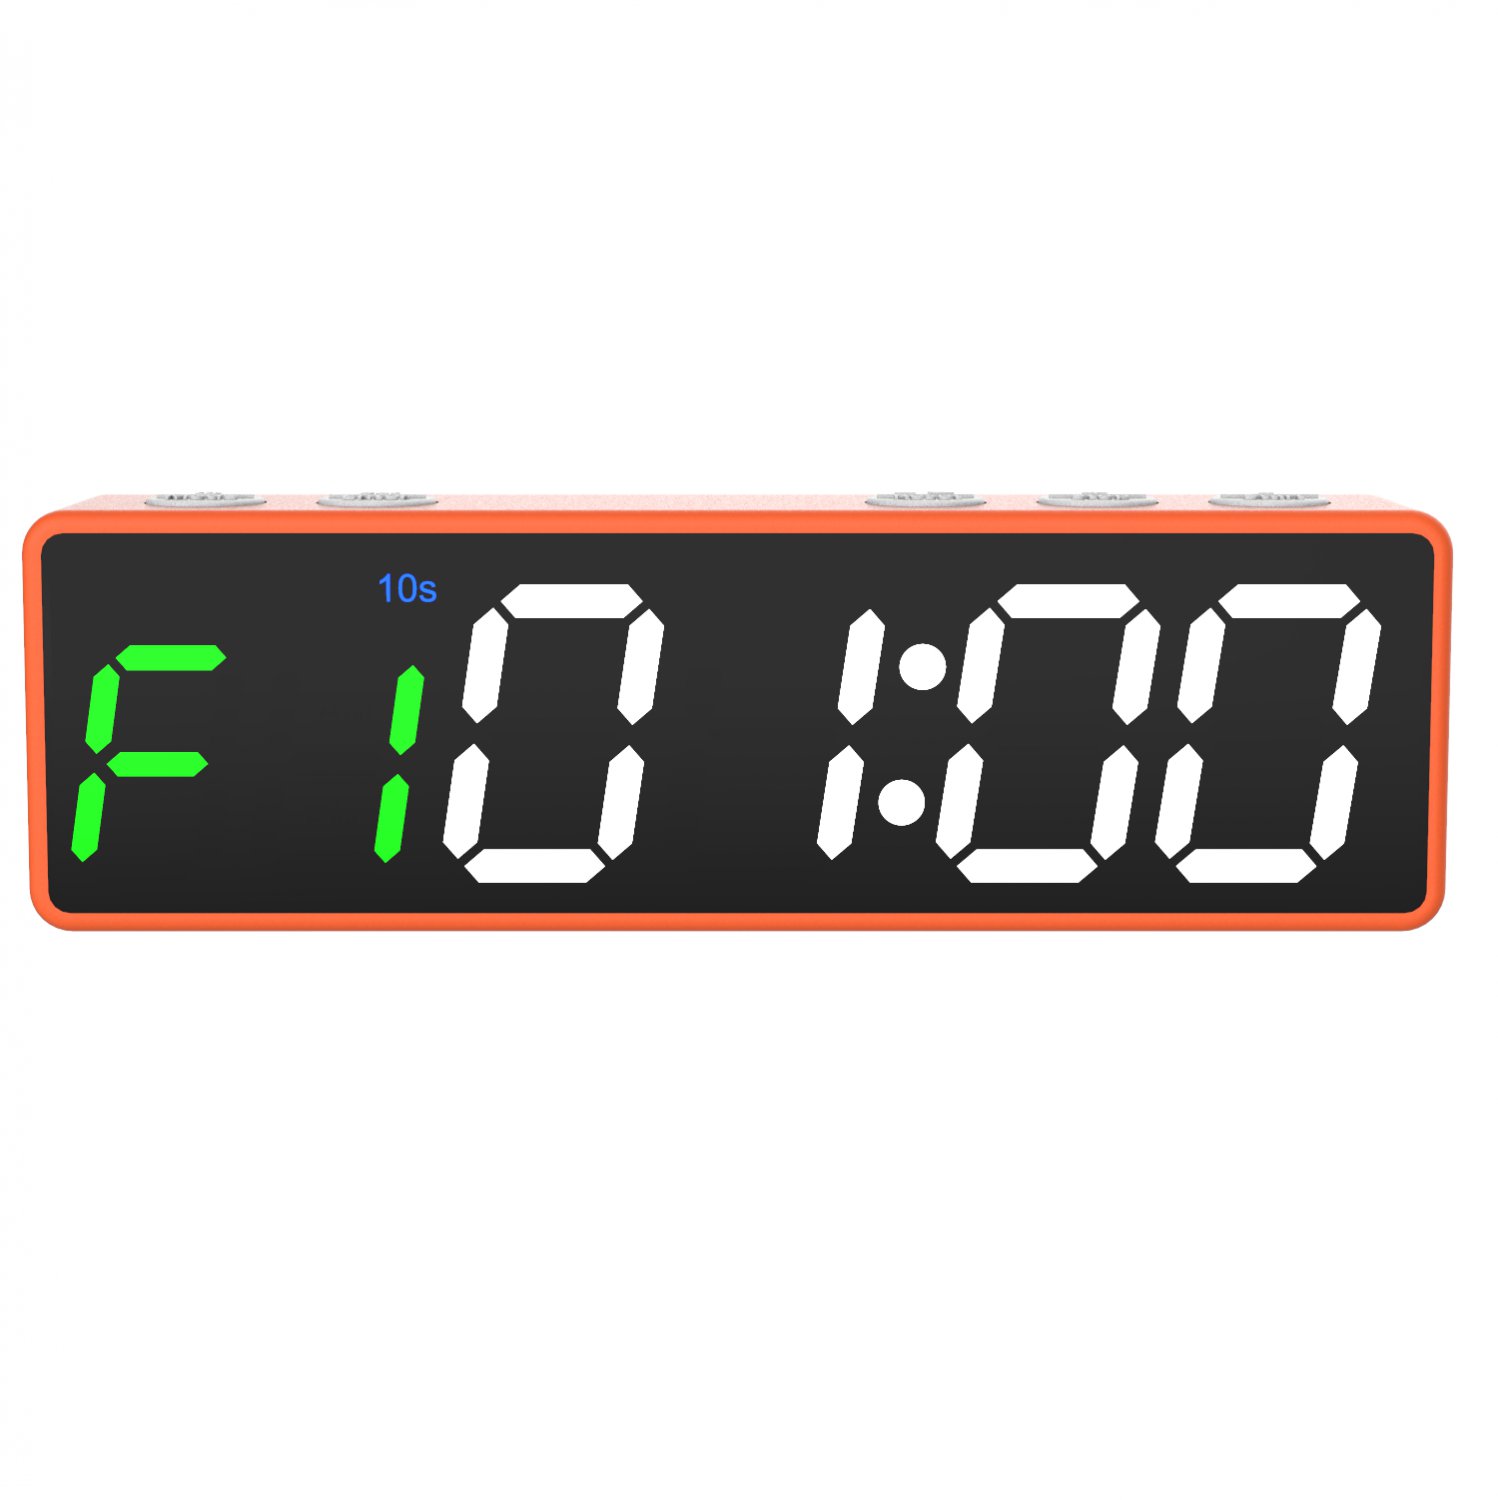 Ultra-Bright LED Pocket Timer for Gym, Kitchen & More - 5.1" Mini Countdown Clock w/ Button Control